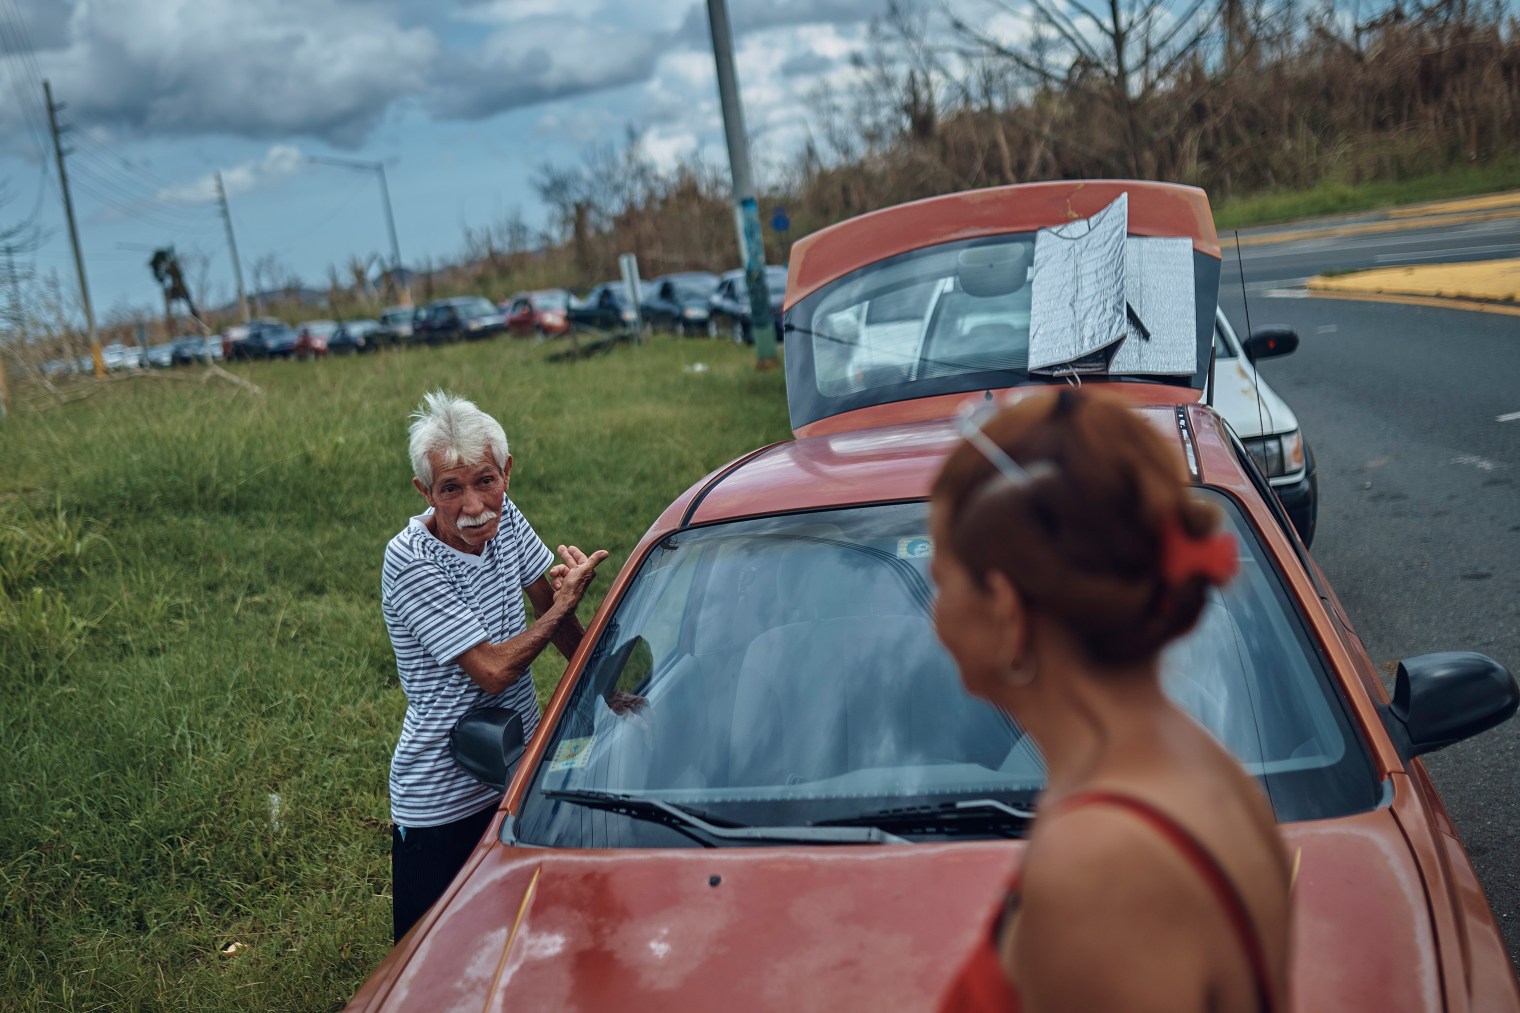 People wait in line to buy gasoline in Morovis, Puerto Rico, on Oct. 1, 2017.